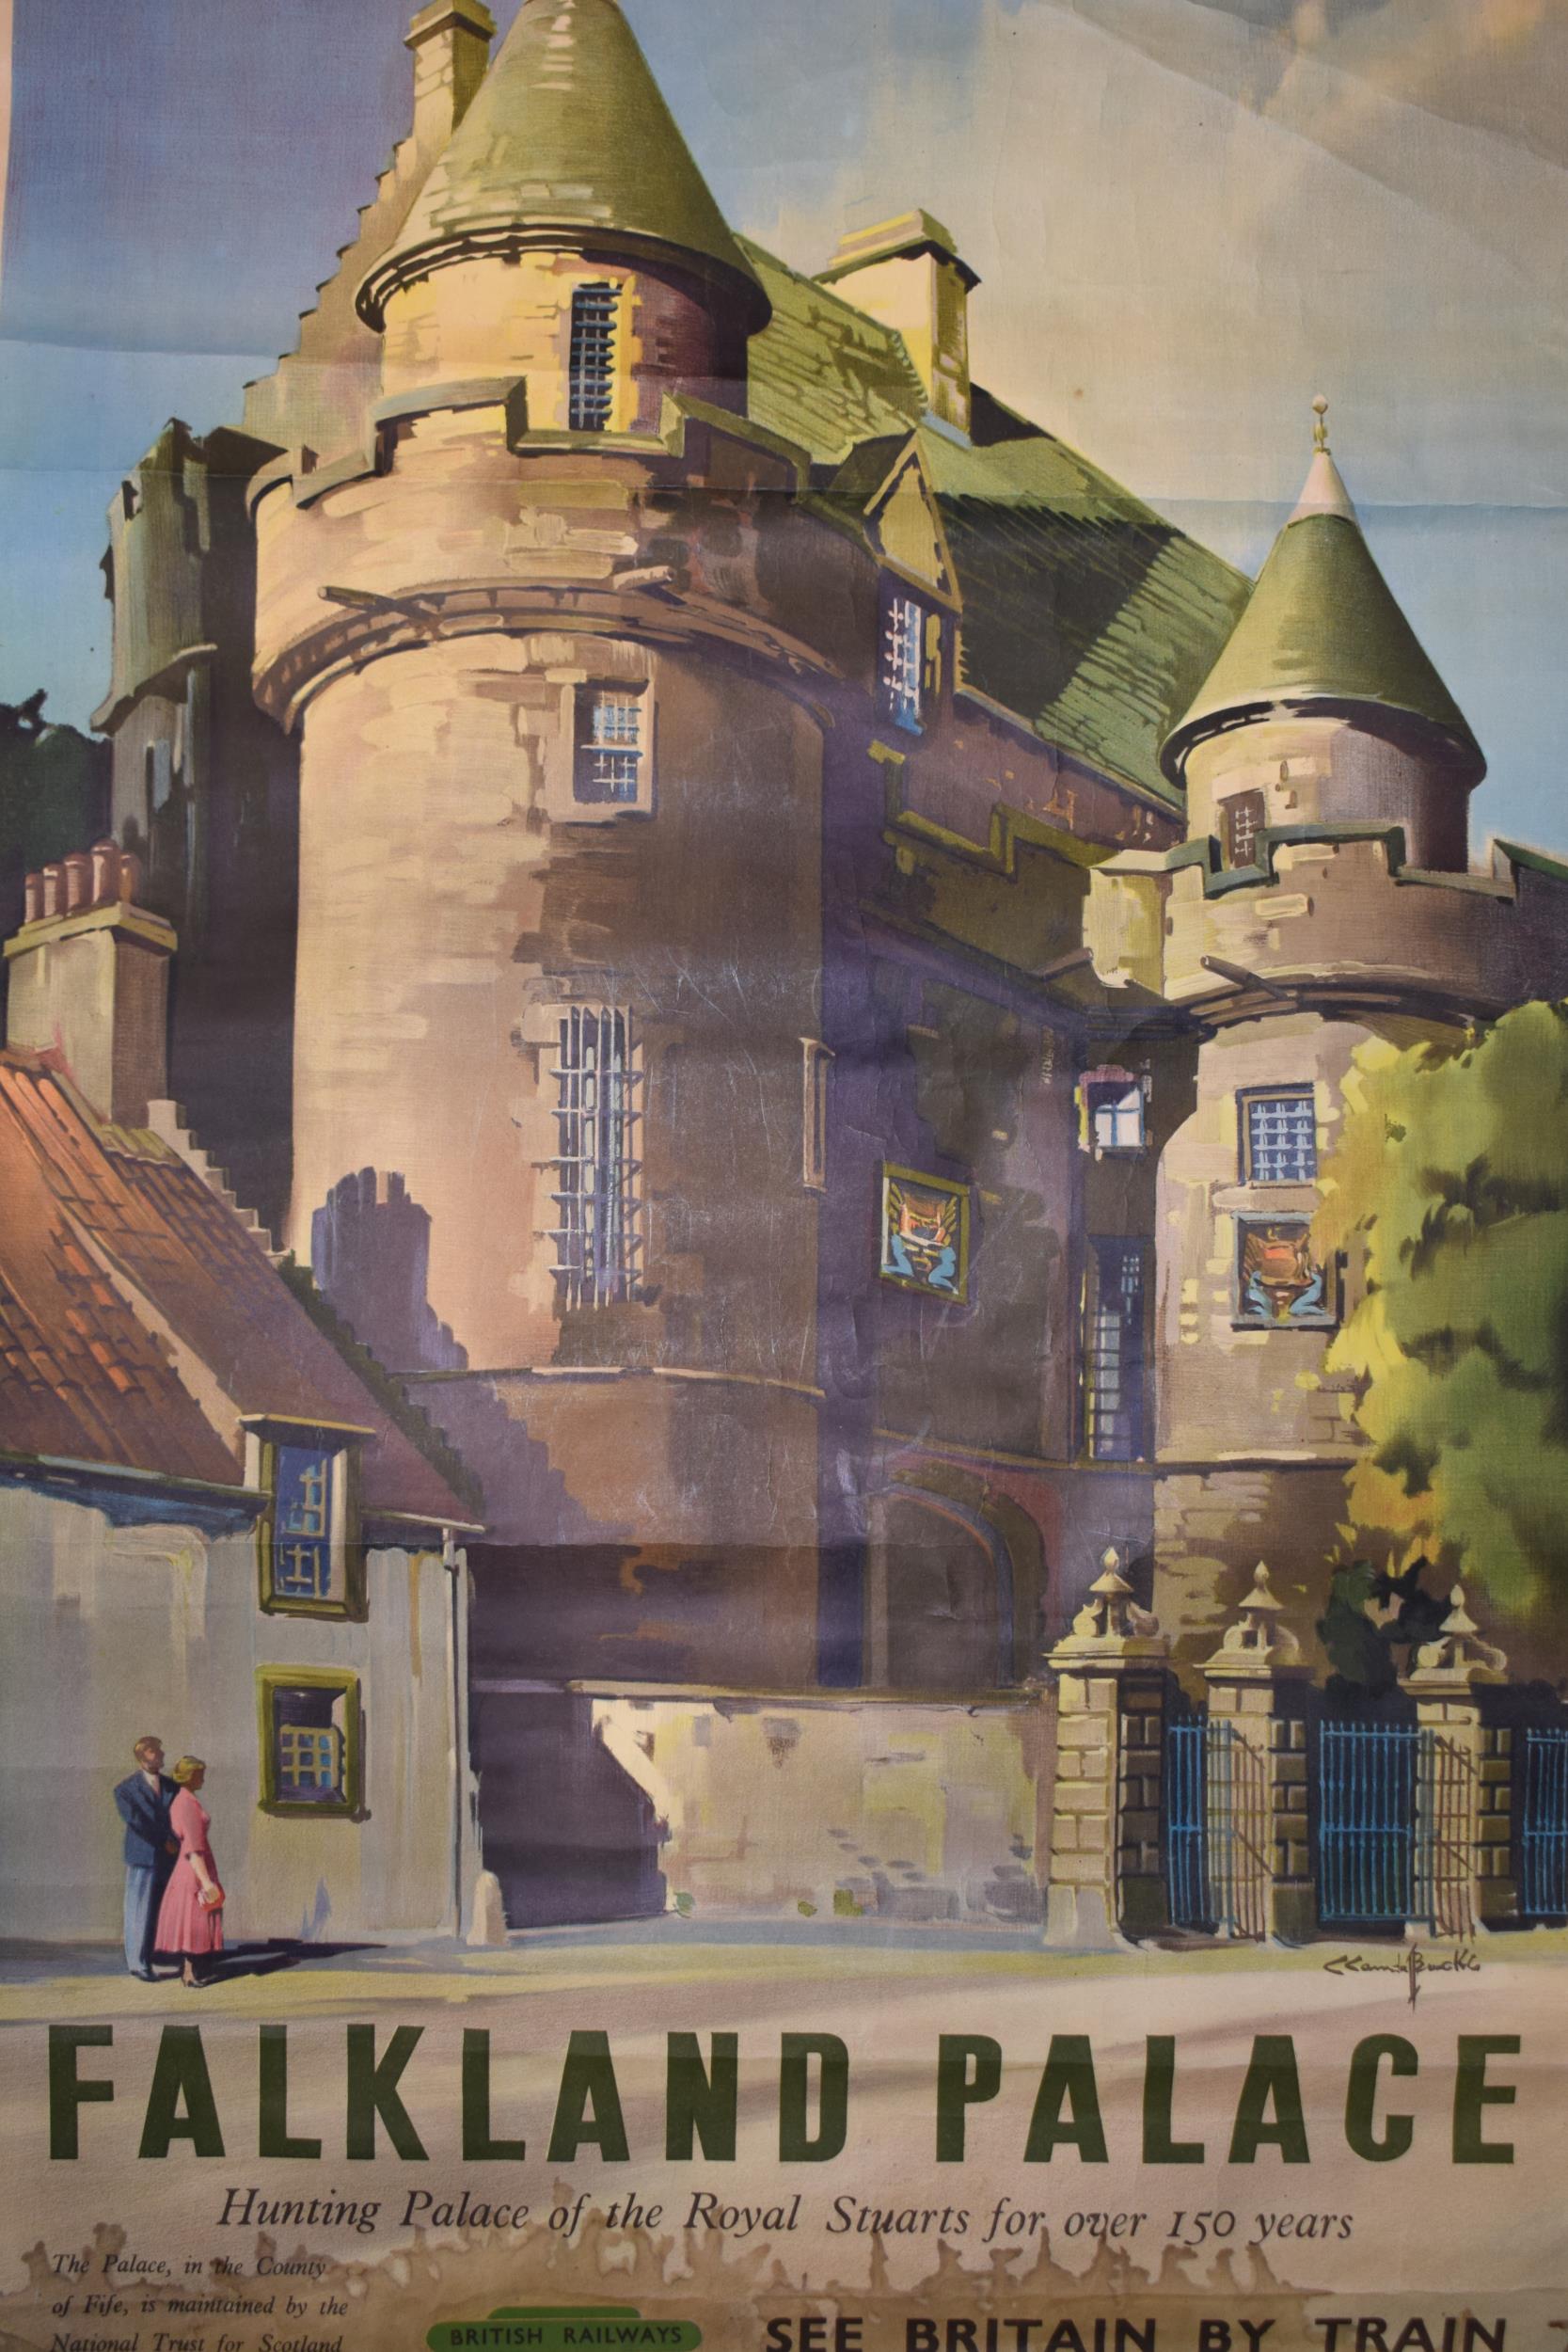 'British Rail' Railway poster 'Falkland Palace' lithograph printed by Stafford & Co, Nottingham.